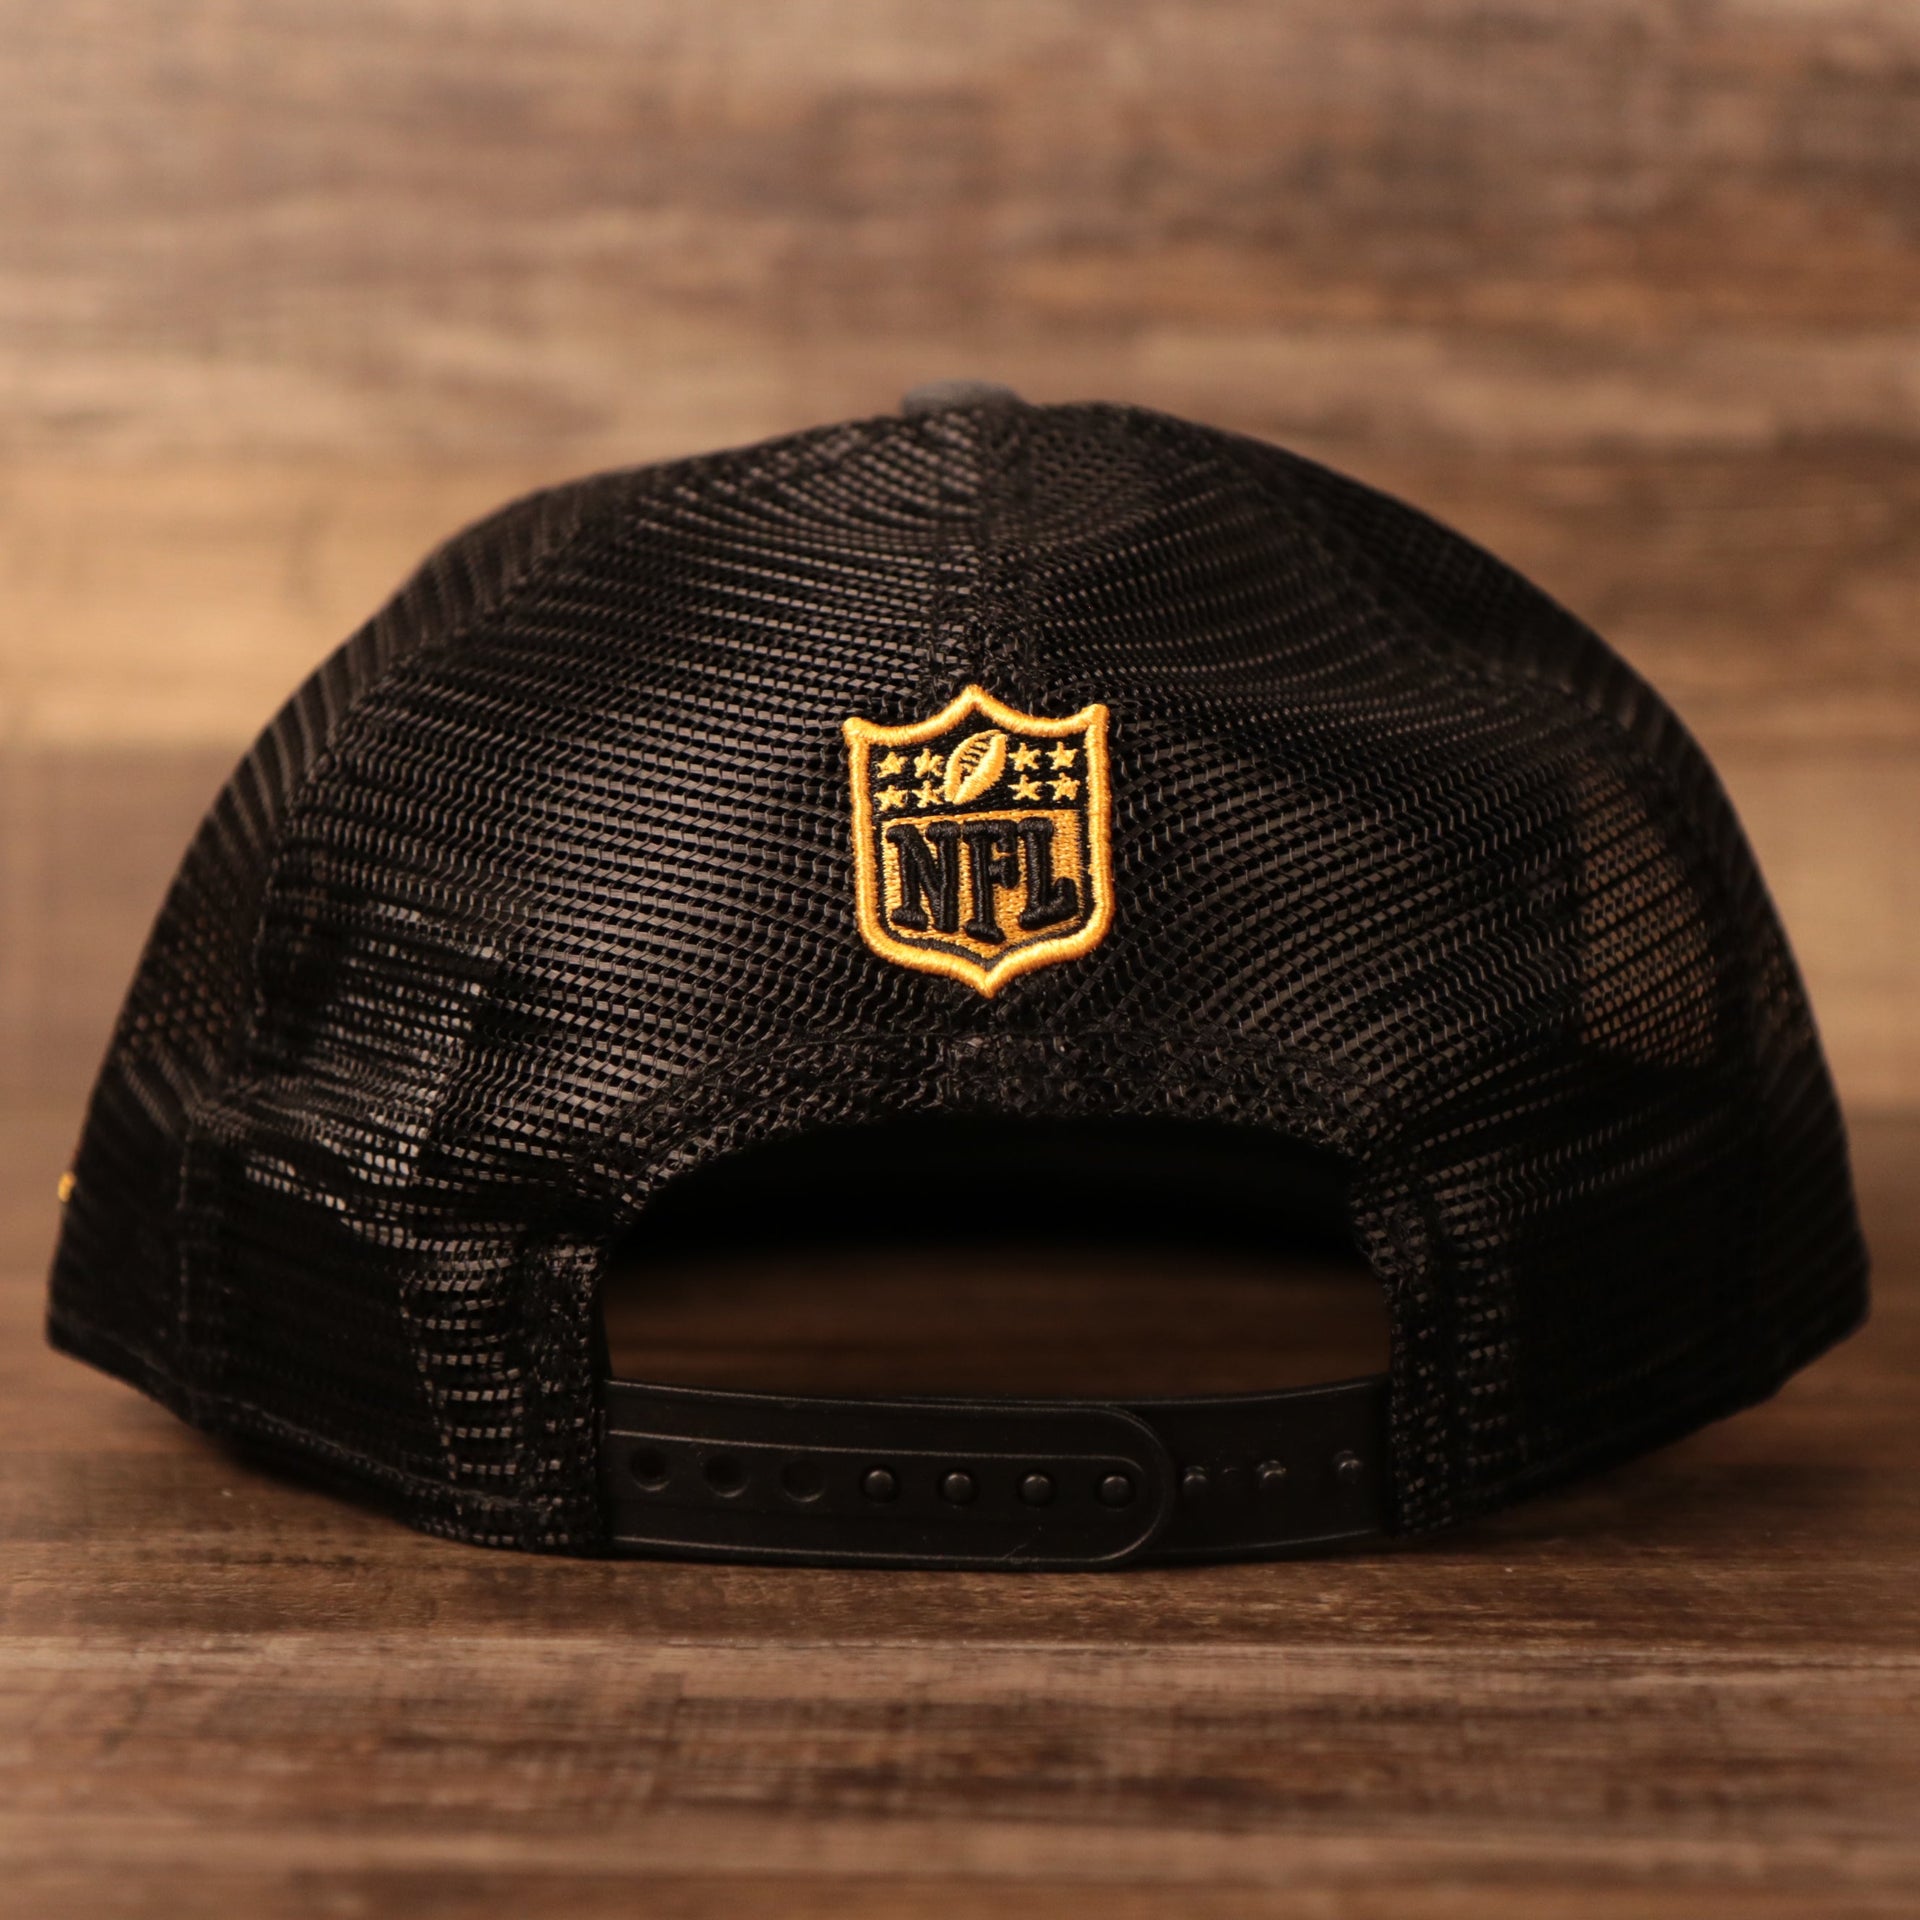 The NFL logo on the back side of the gray/black Steelers 2021 NFL draft cap.